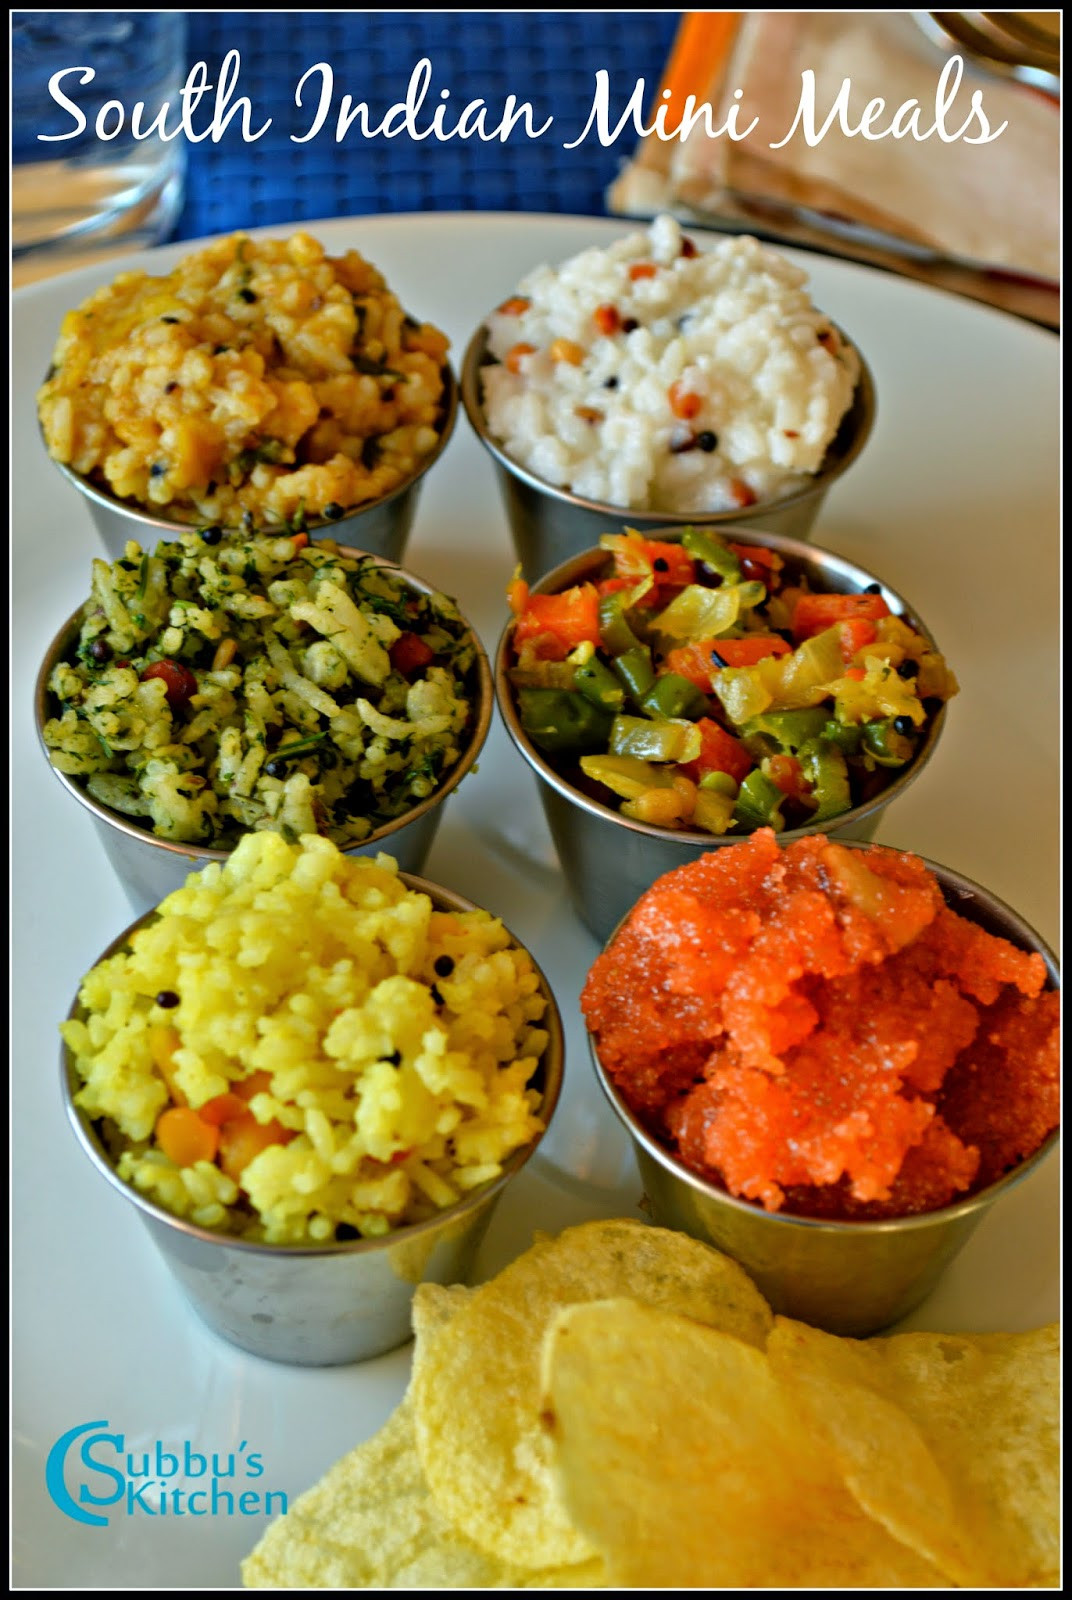 South Indian Lunch Recipes
 South Indian Lunch Menu 14 SouthIndian Mini Meals